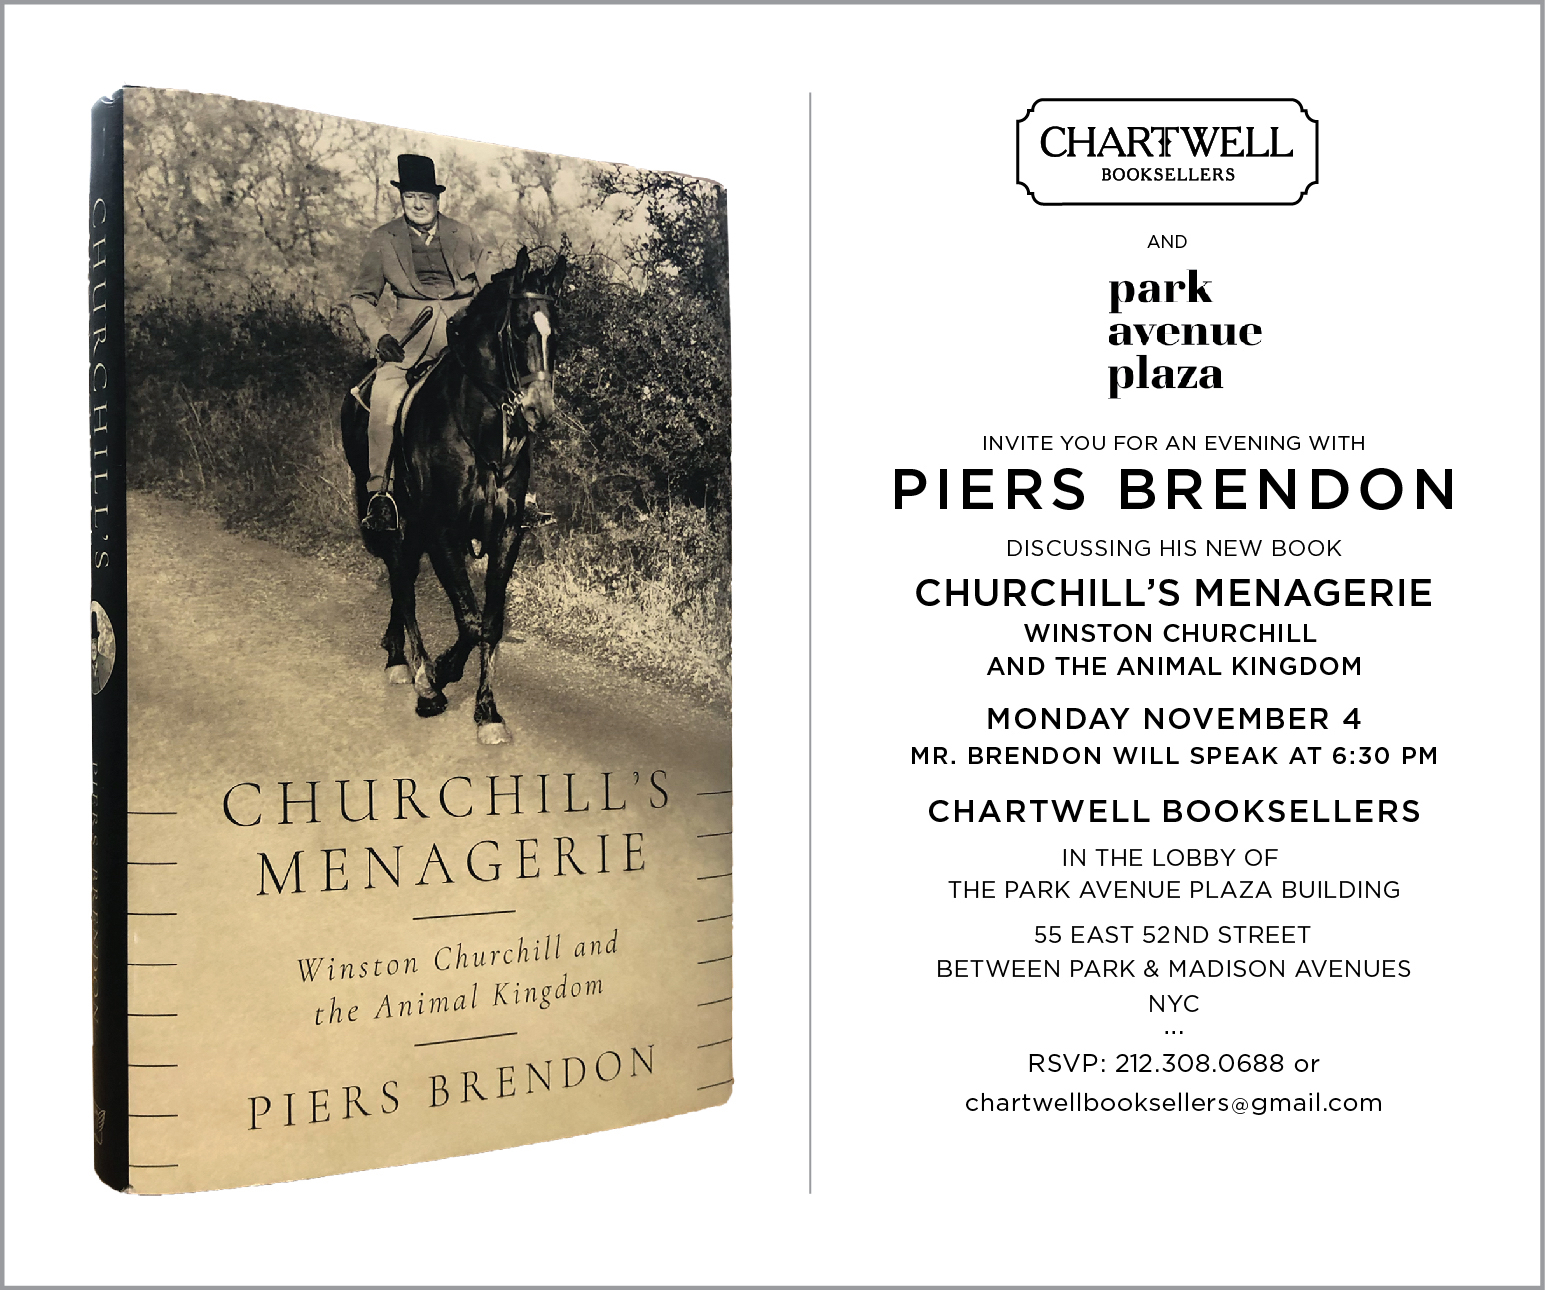 “CHURCHILL’S MENAGERIE:” AN EVENING WITH PIERS BRENDON